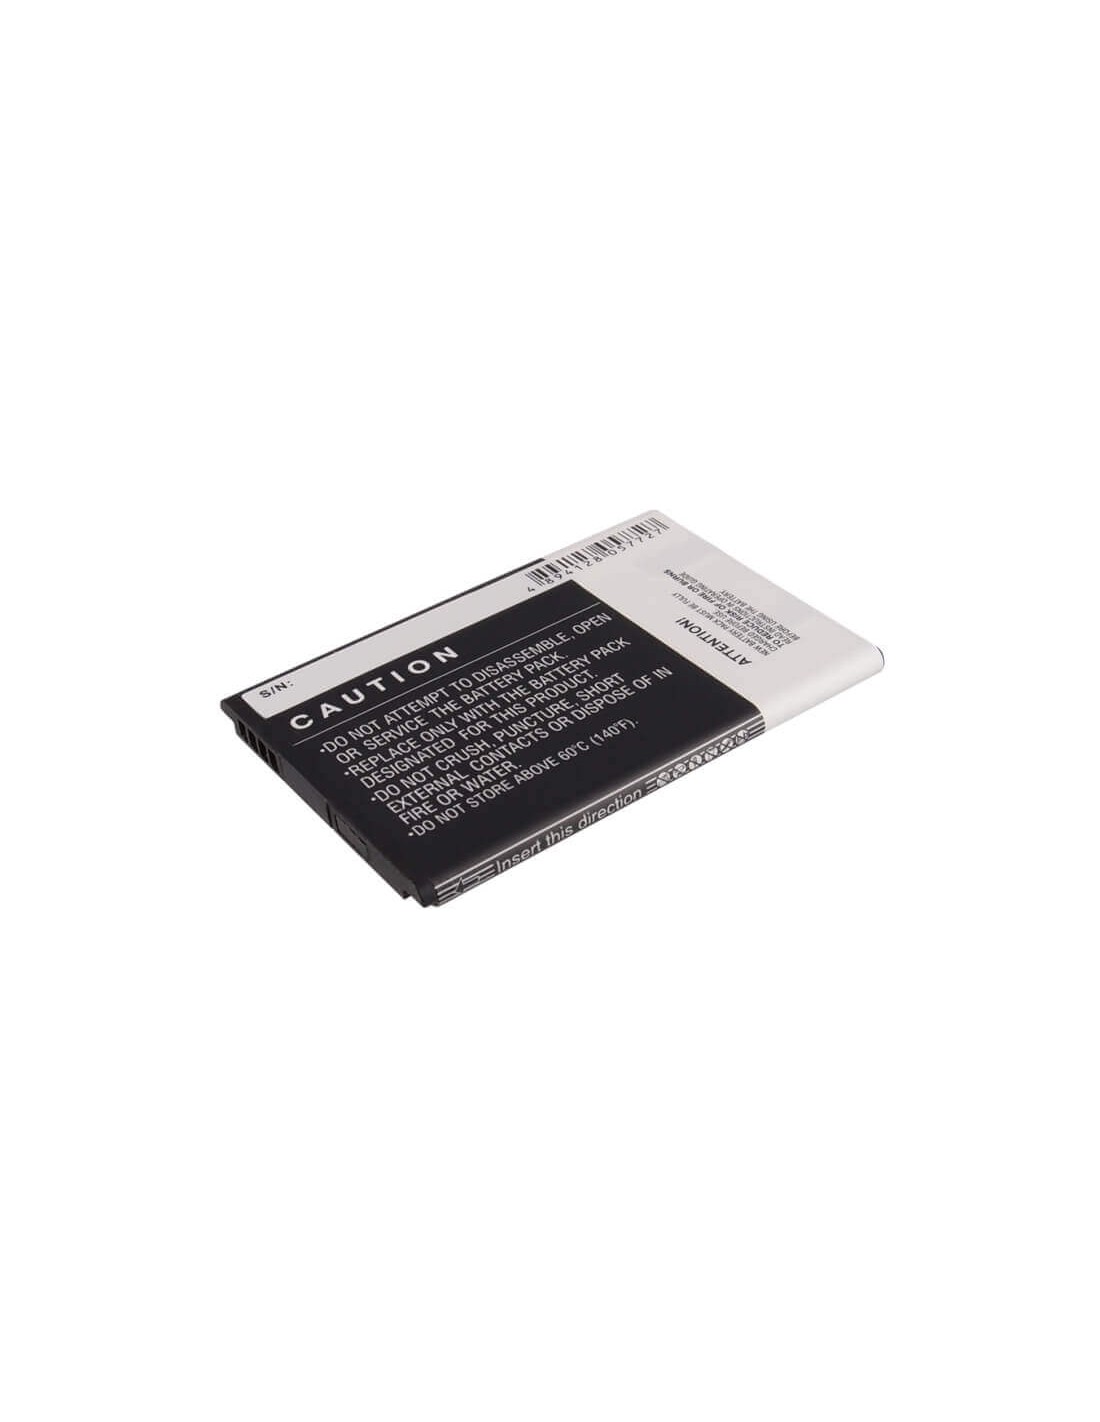 Battery for Blackberry Bold Touch 9900, Pluto, Bold Touch 9930 3.7V, 1450mAh - 5.37Wh